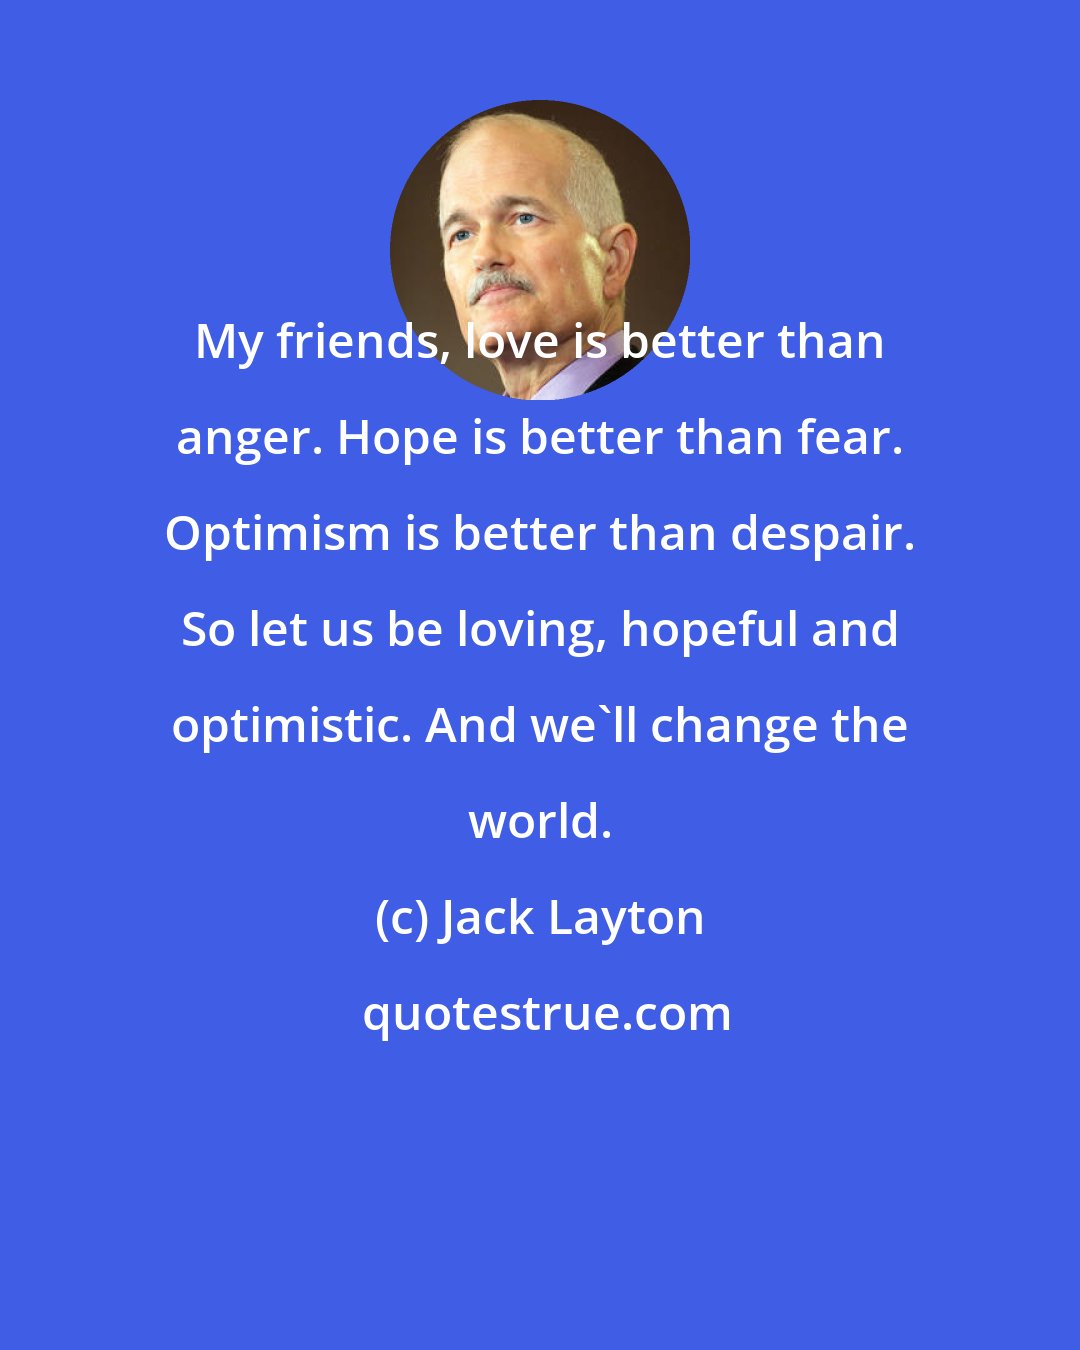 Jack Layton: My friends, love is better than anger. Hope is better than fear. Optimism is better than despair. So let us be loving, hopeful and optimistic. And we'll change the world.